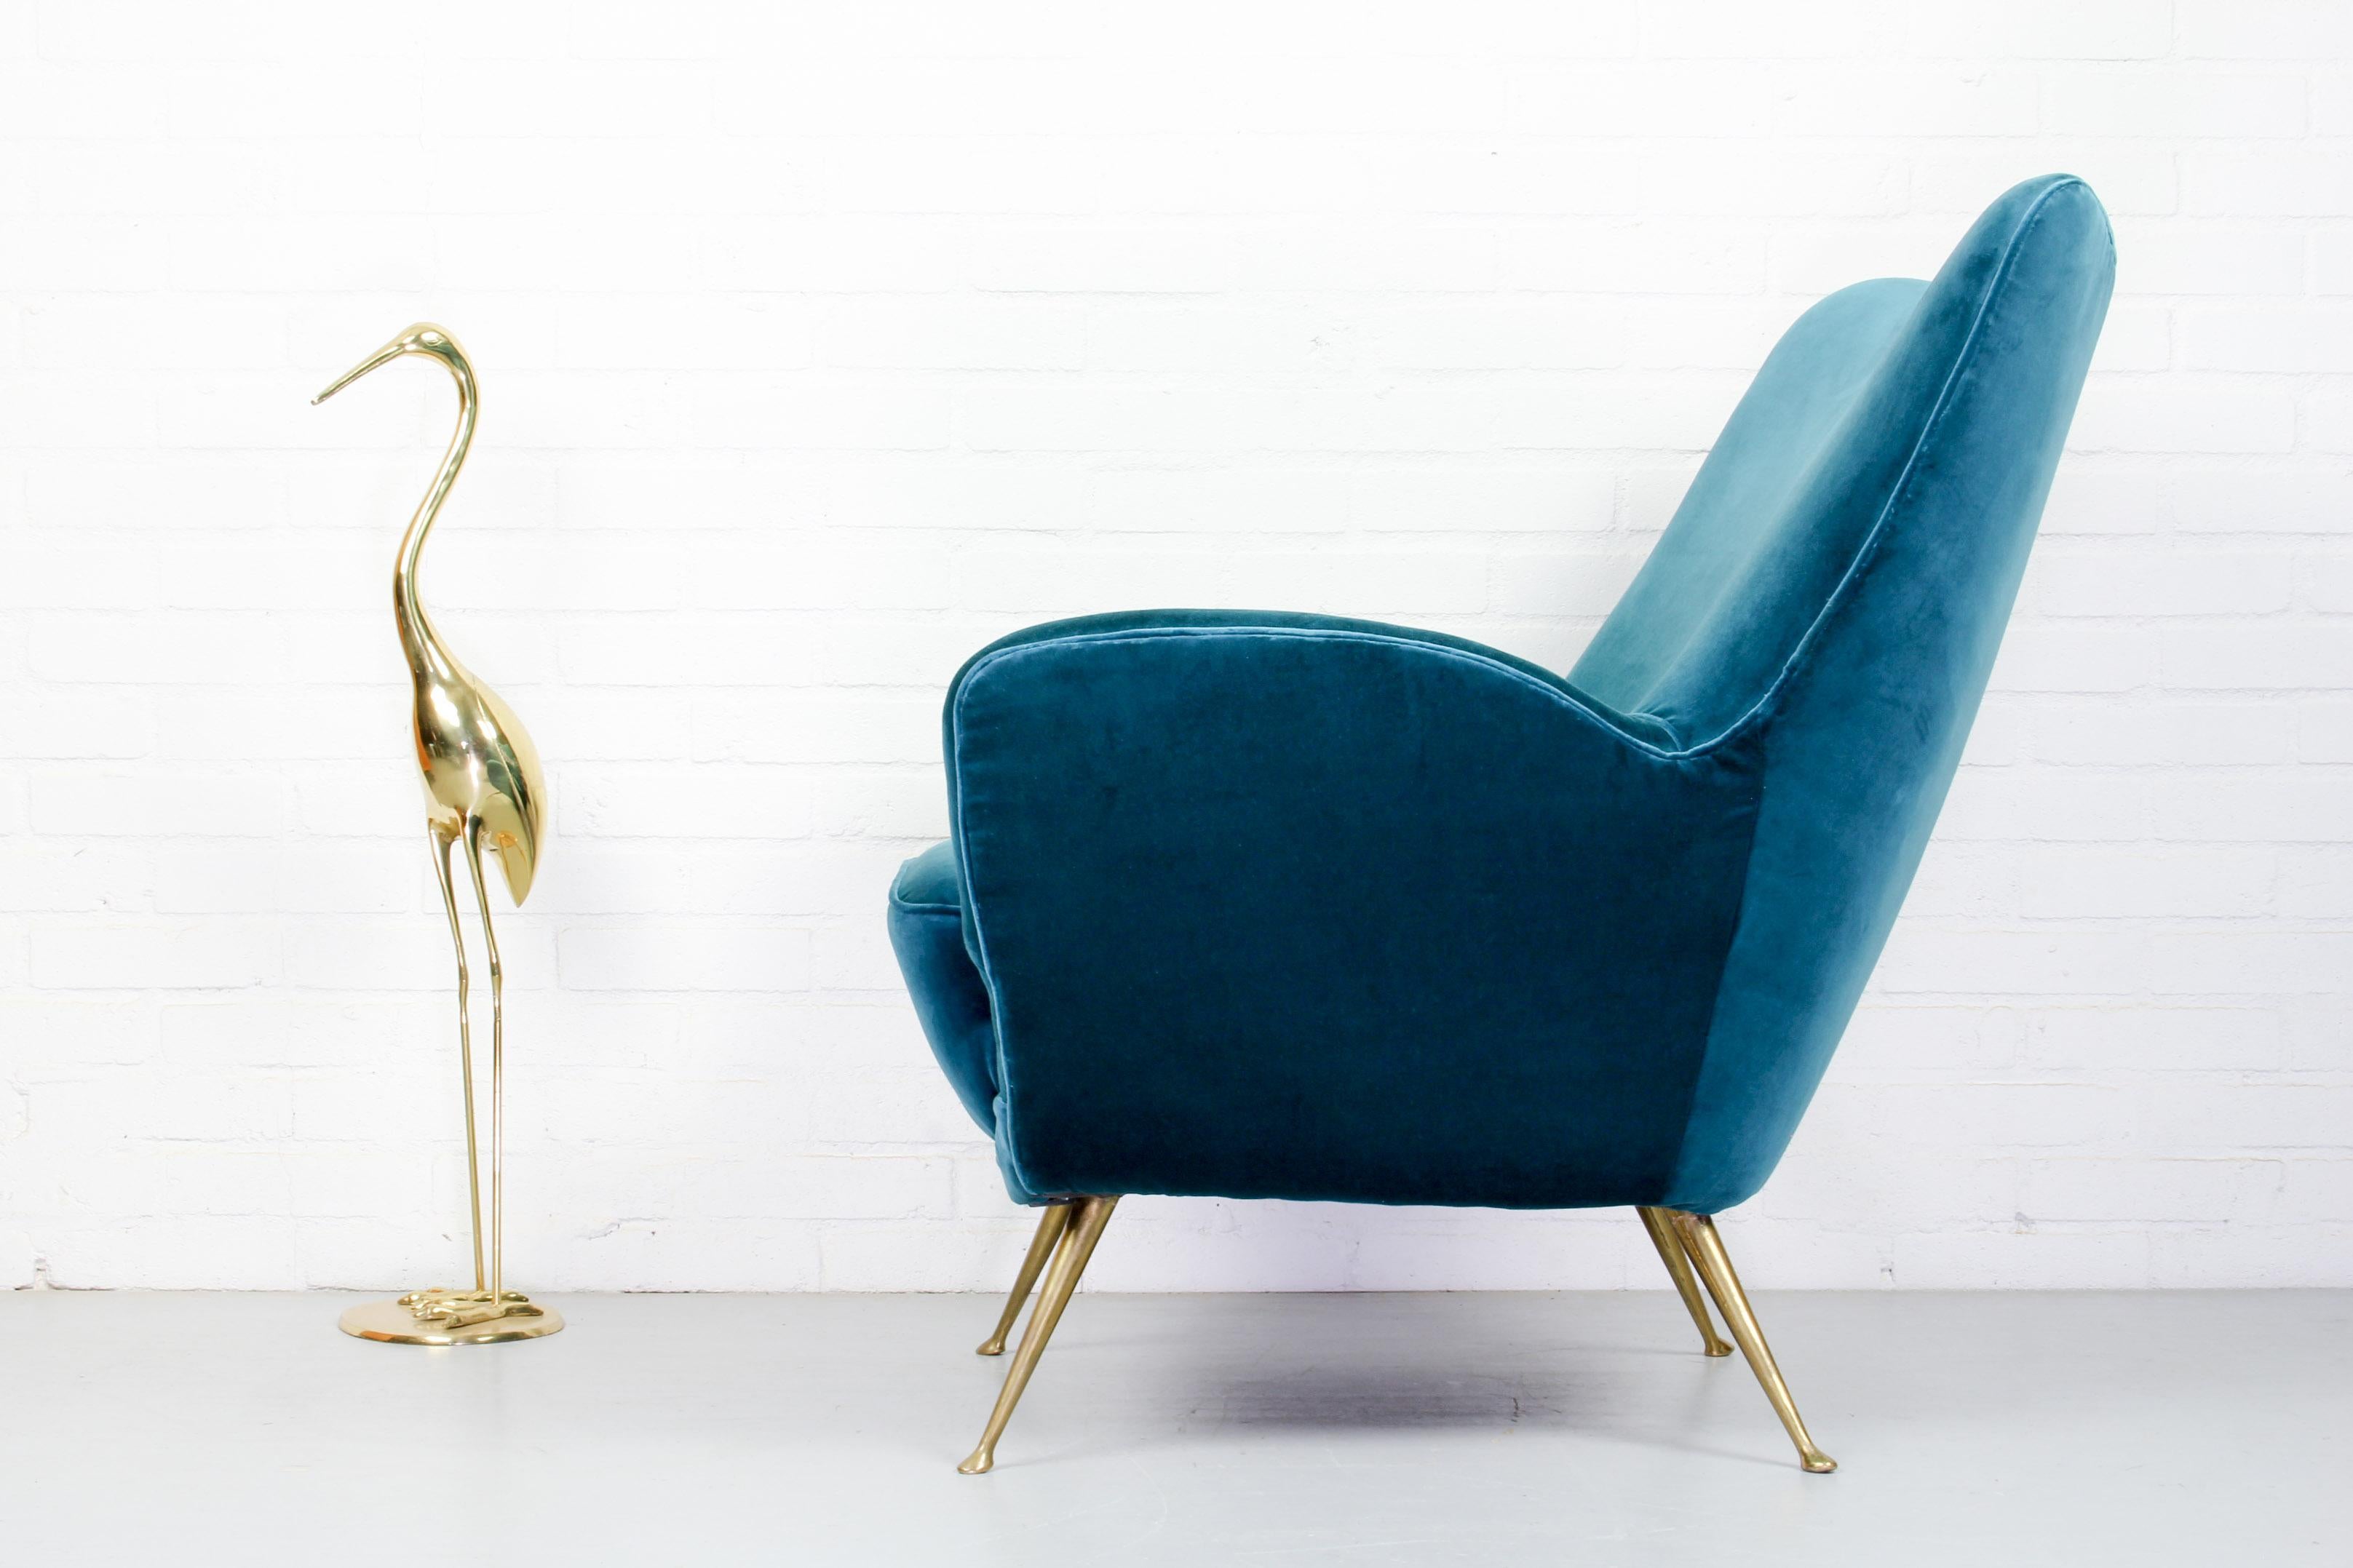 Design period: 1960-1969. Country of production: Italy. Style: Vintage midcentury, Modern Italian. Condition very good: this vintage article has no flaws, but may have minor signs of wear. Materials: Brass, velvet. Color: Gold, blue/green.
  